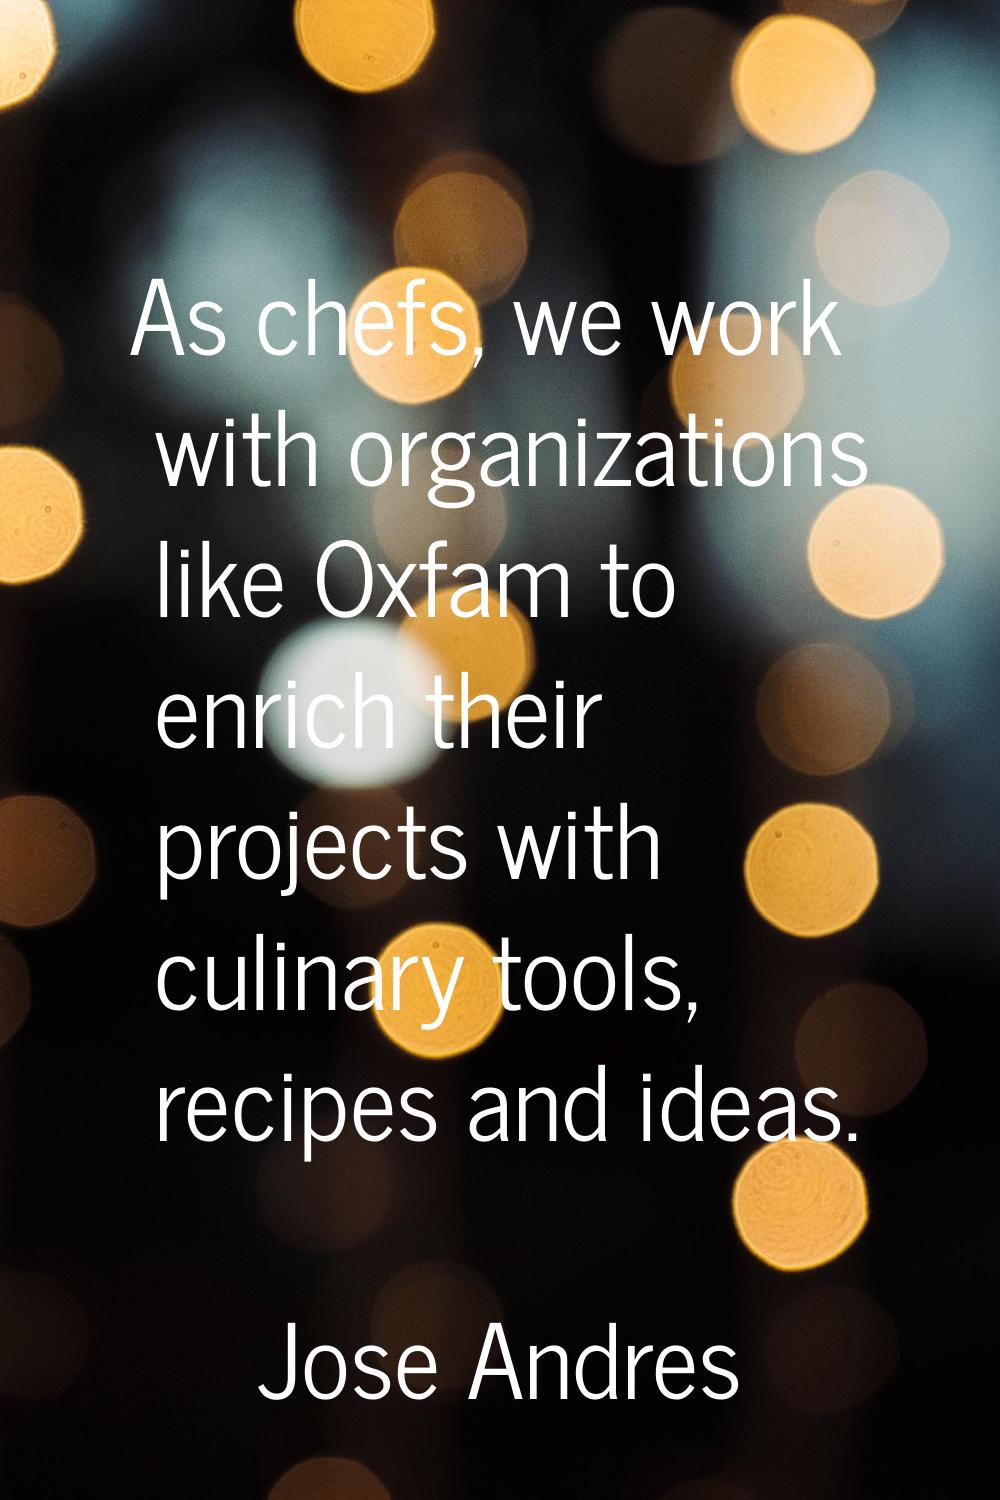 As chefs, we work with organizations like Oxfam to enrich their projects with culinary tools, recip